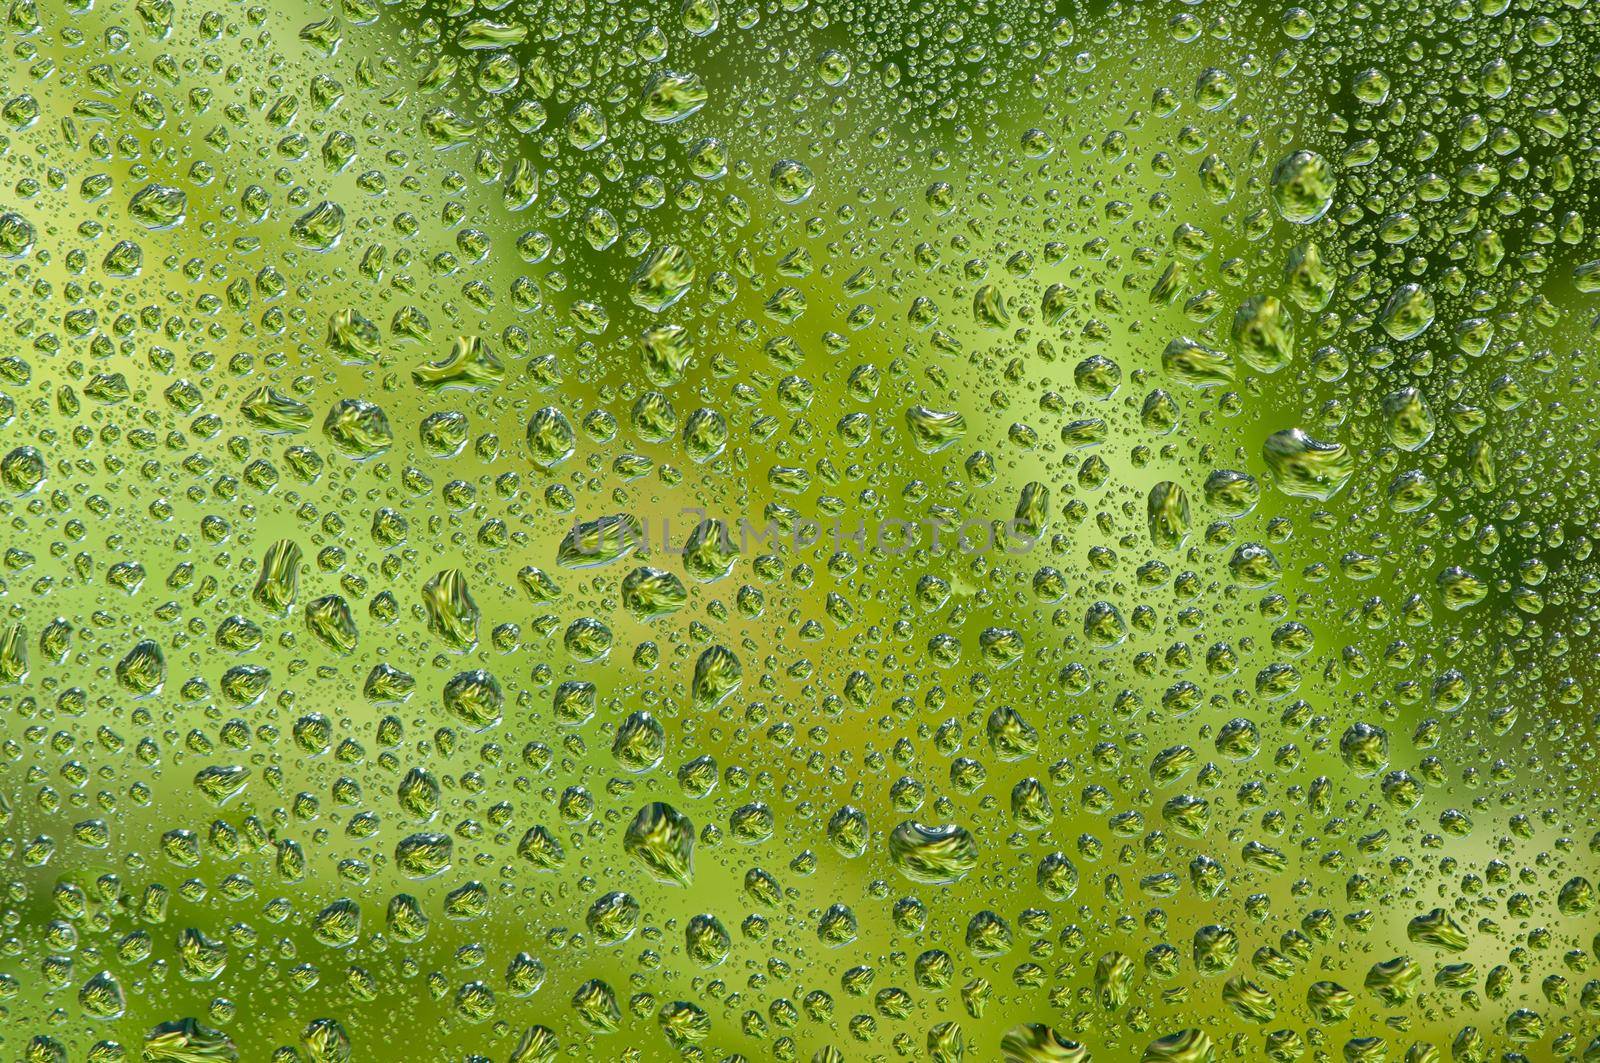 Water drop on glass window with green tree background.